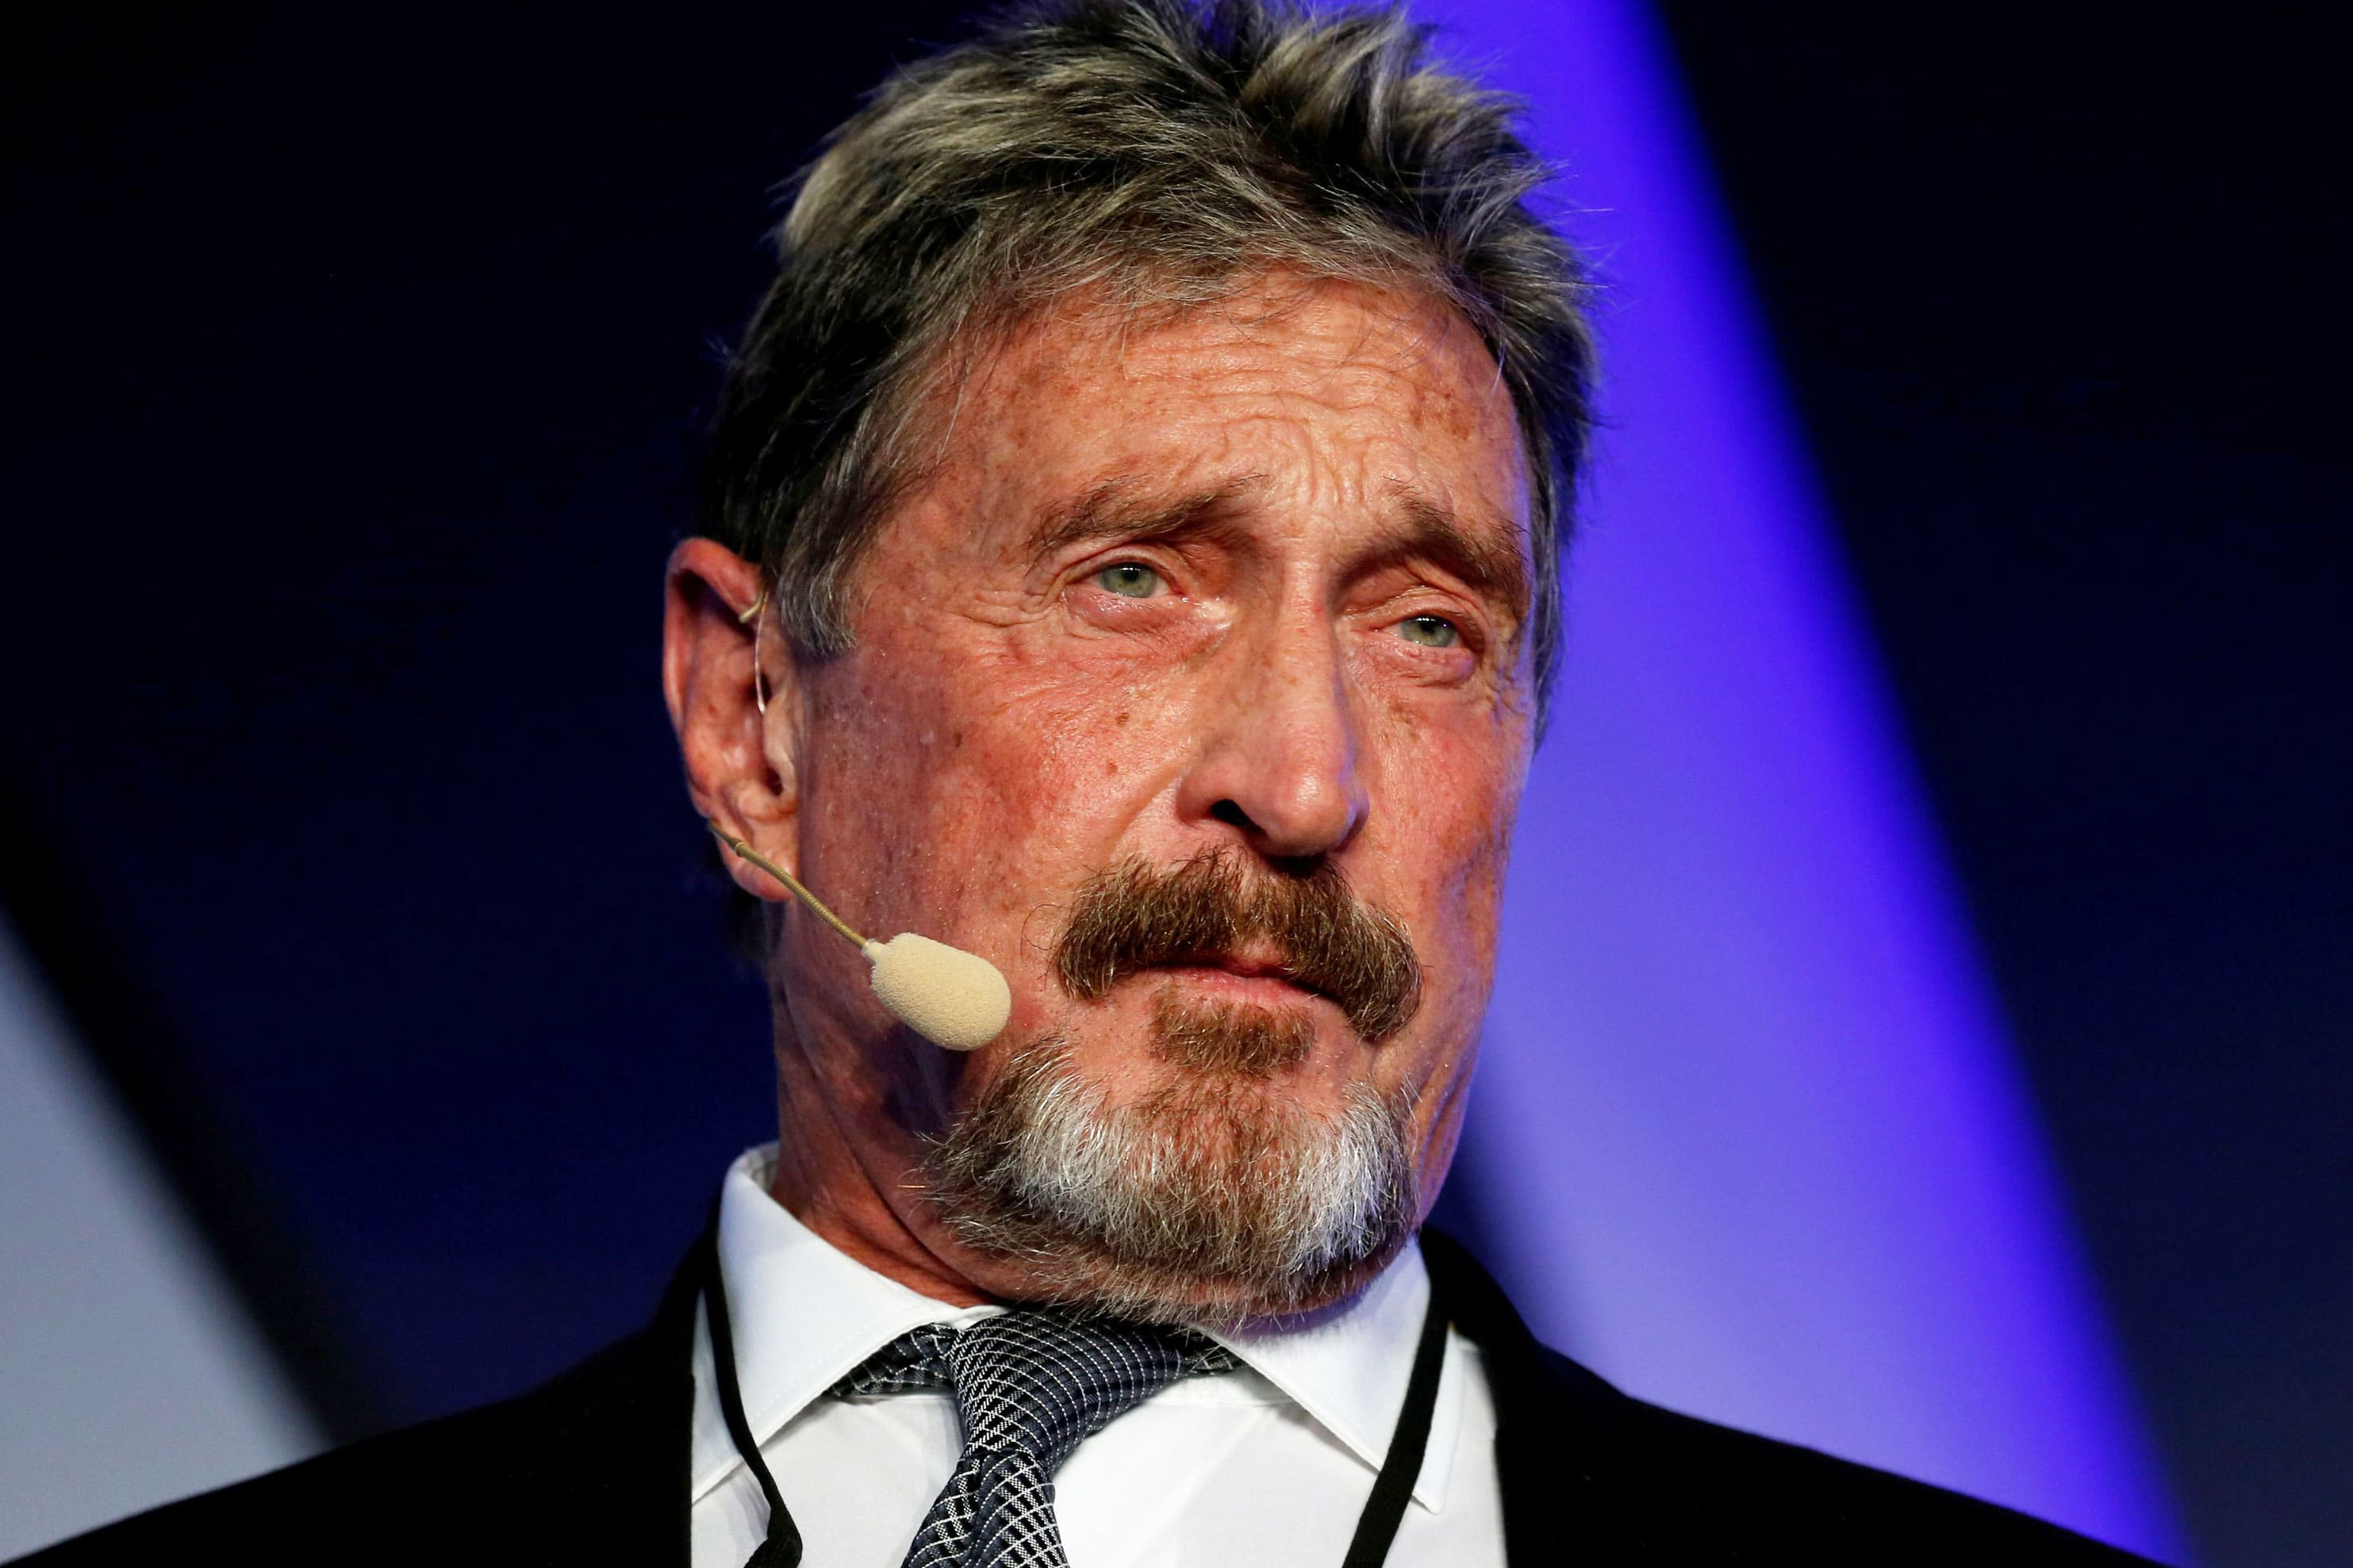 Eccentric antivirus software company founder John McAfee was found dead in his prison cell in Barcelona, Spain, on Wednesday, shortly after Spain'